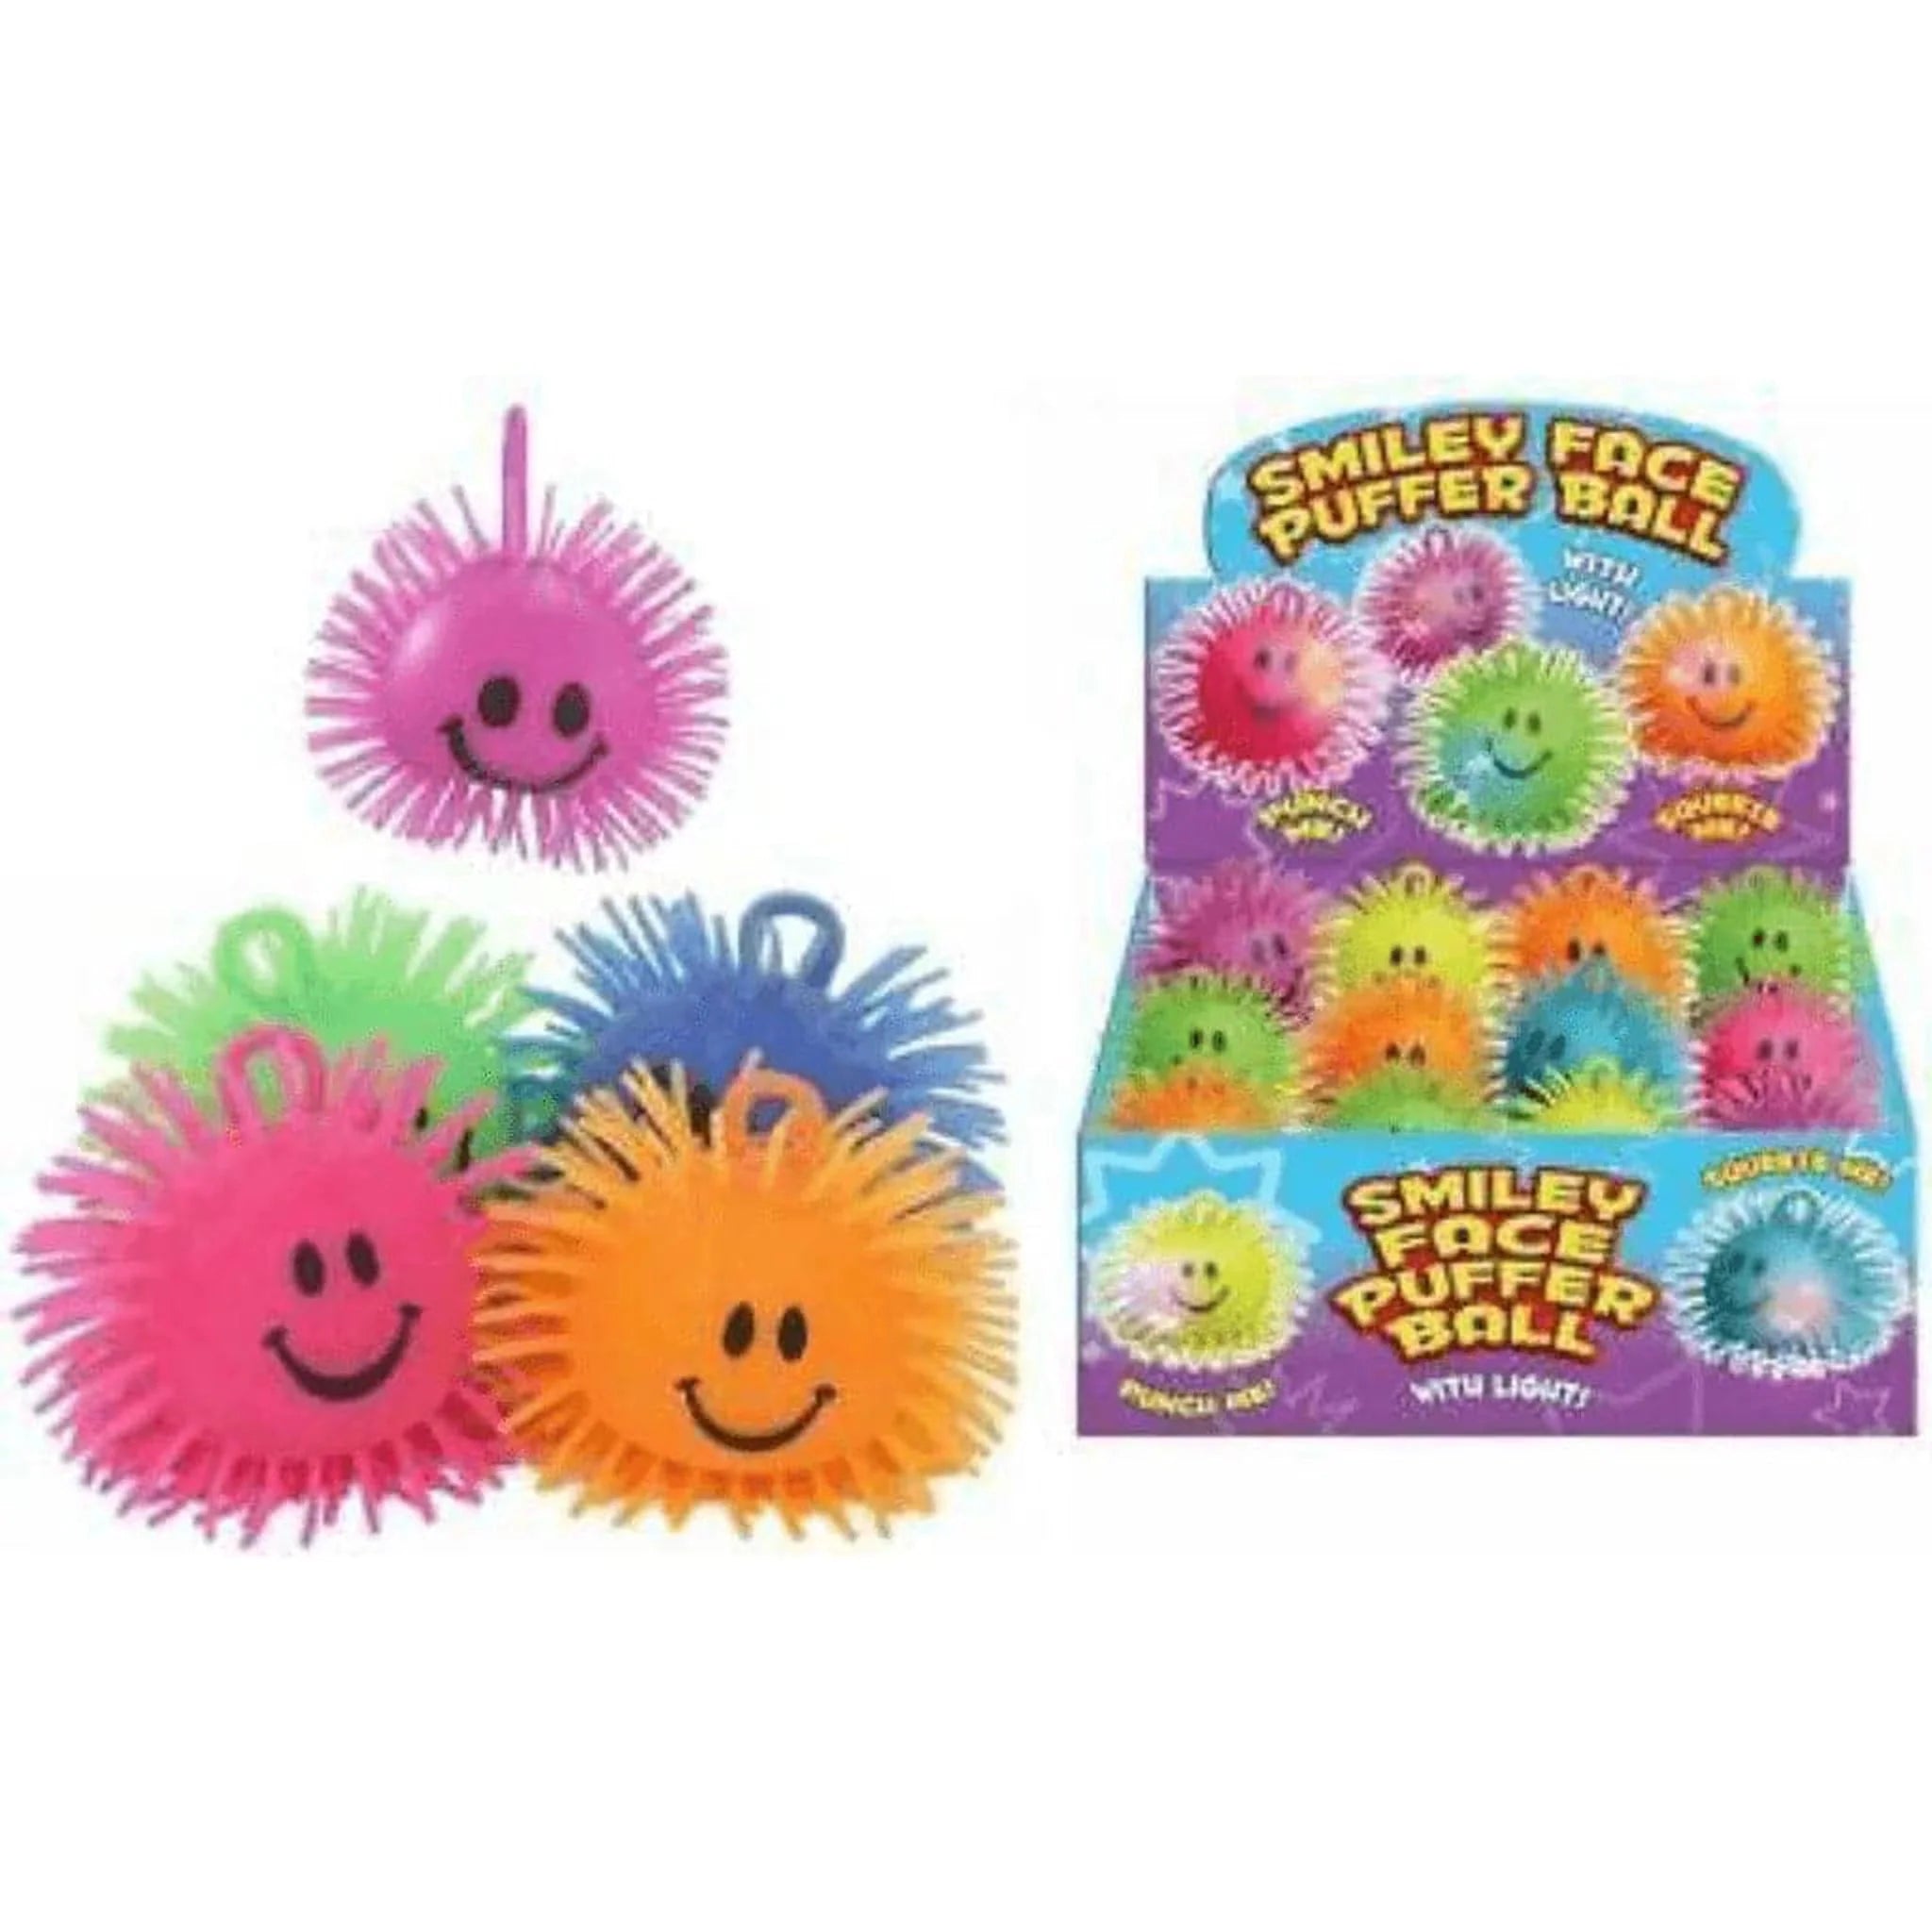 Smiley Face Puffer Ball With Light - Kids Party Craft